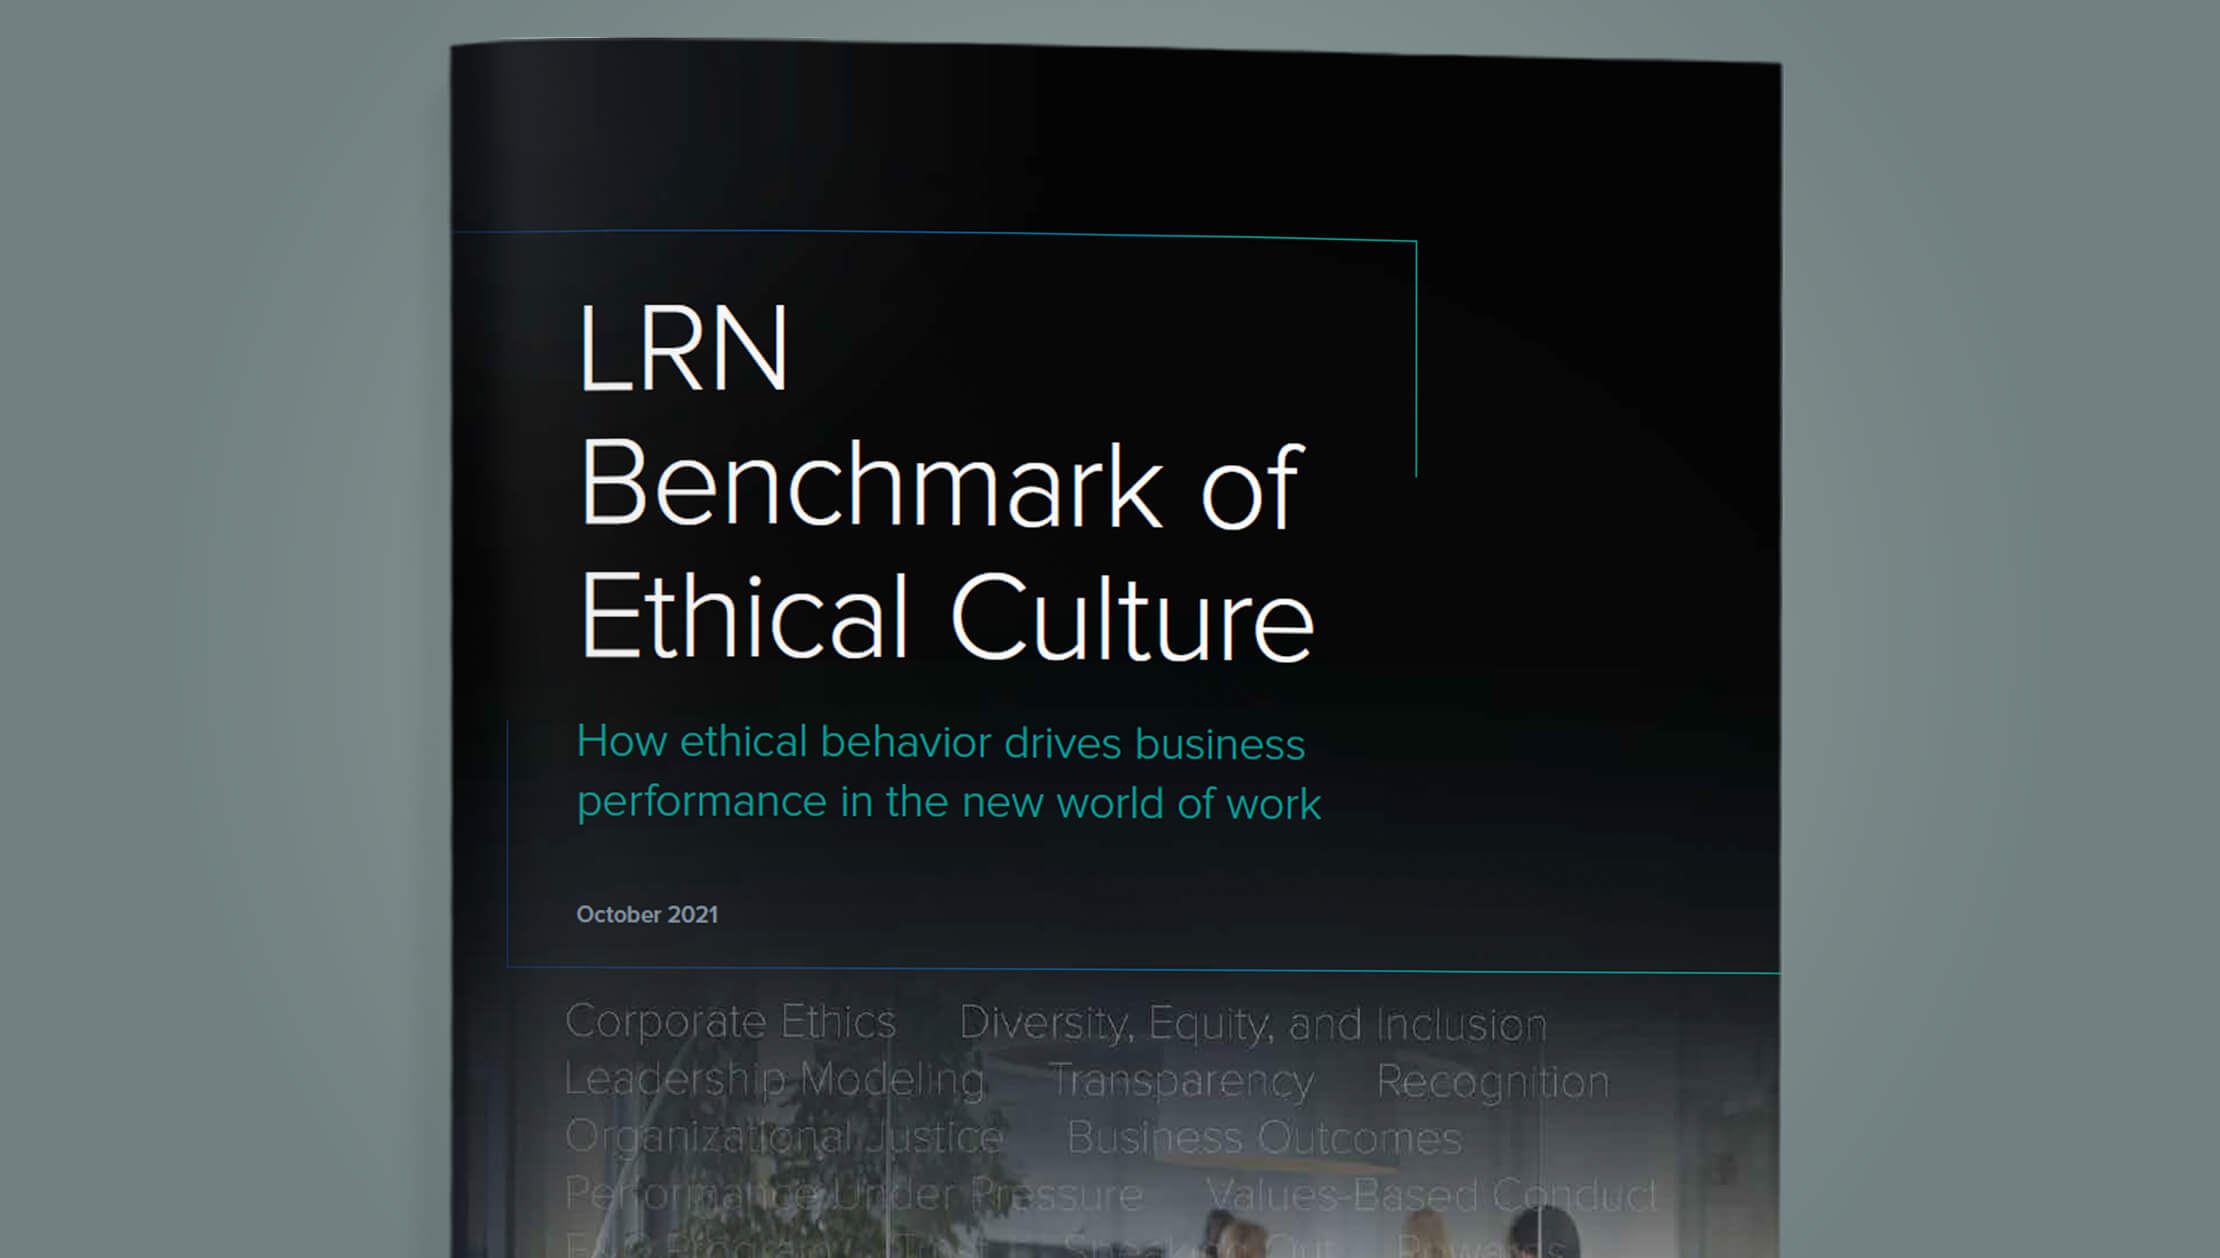 <p>LRN Benchmark of Ethical Culture</p>